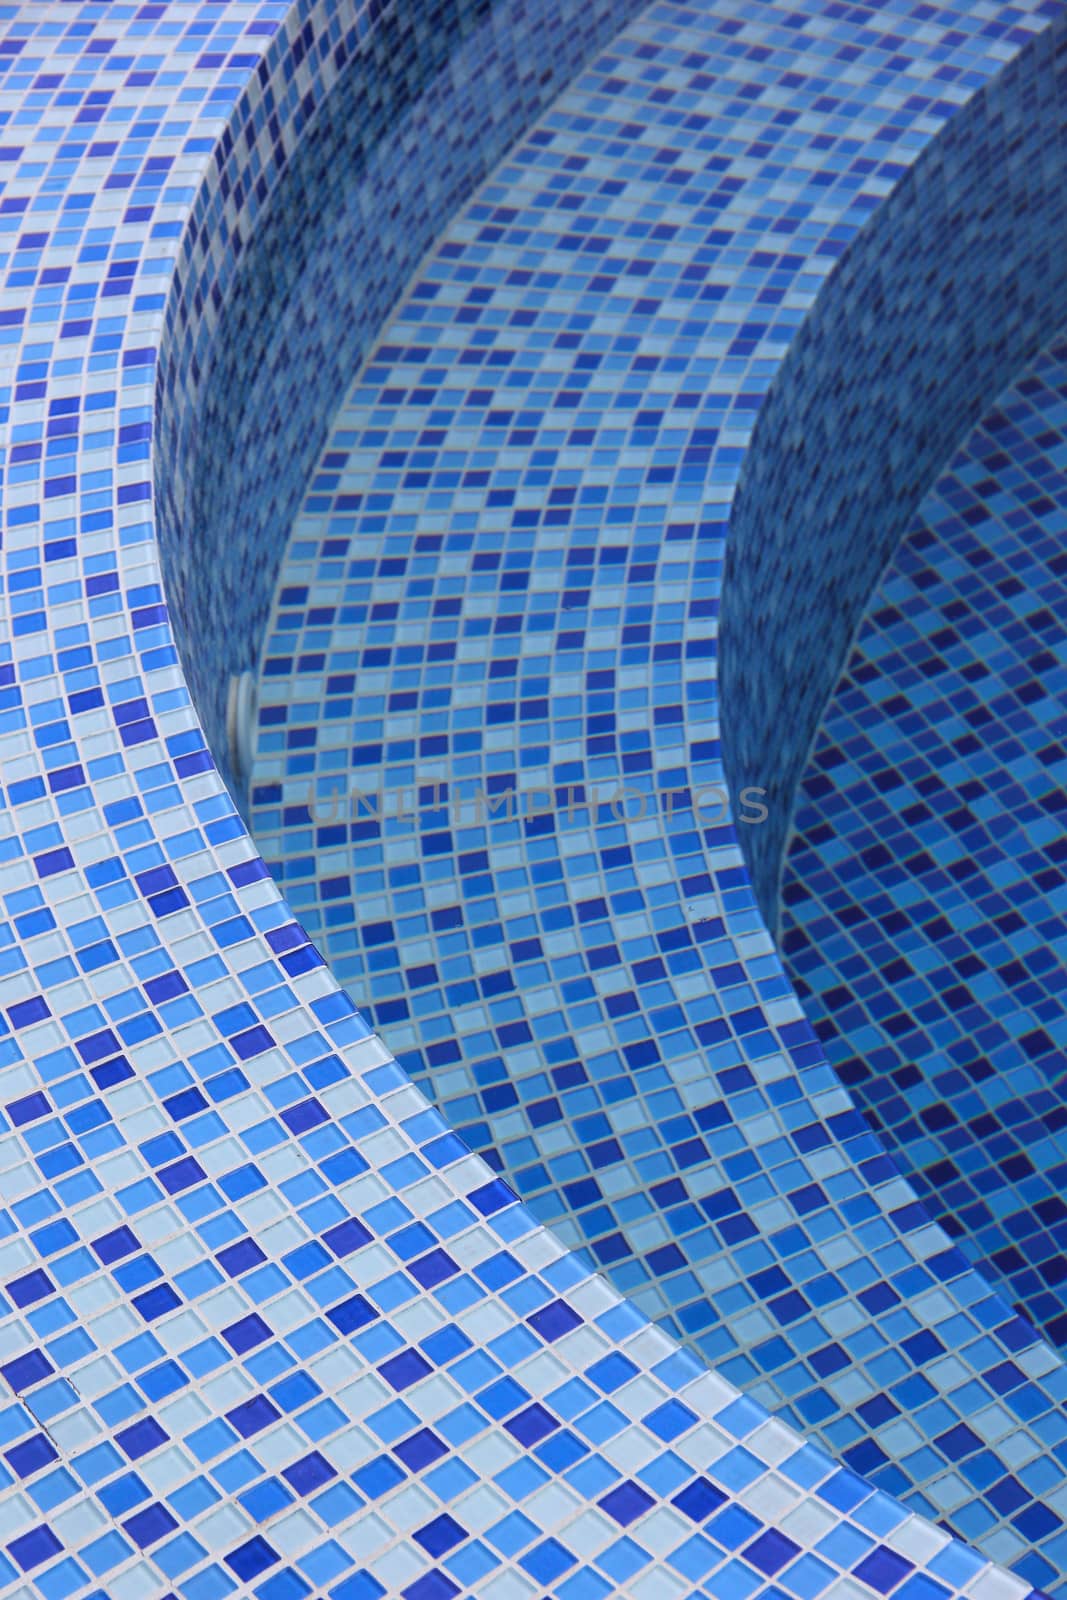 Curved steps at the swimming pool with blue tile mosaic